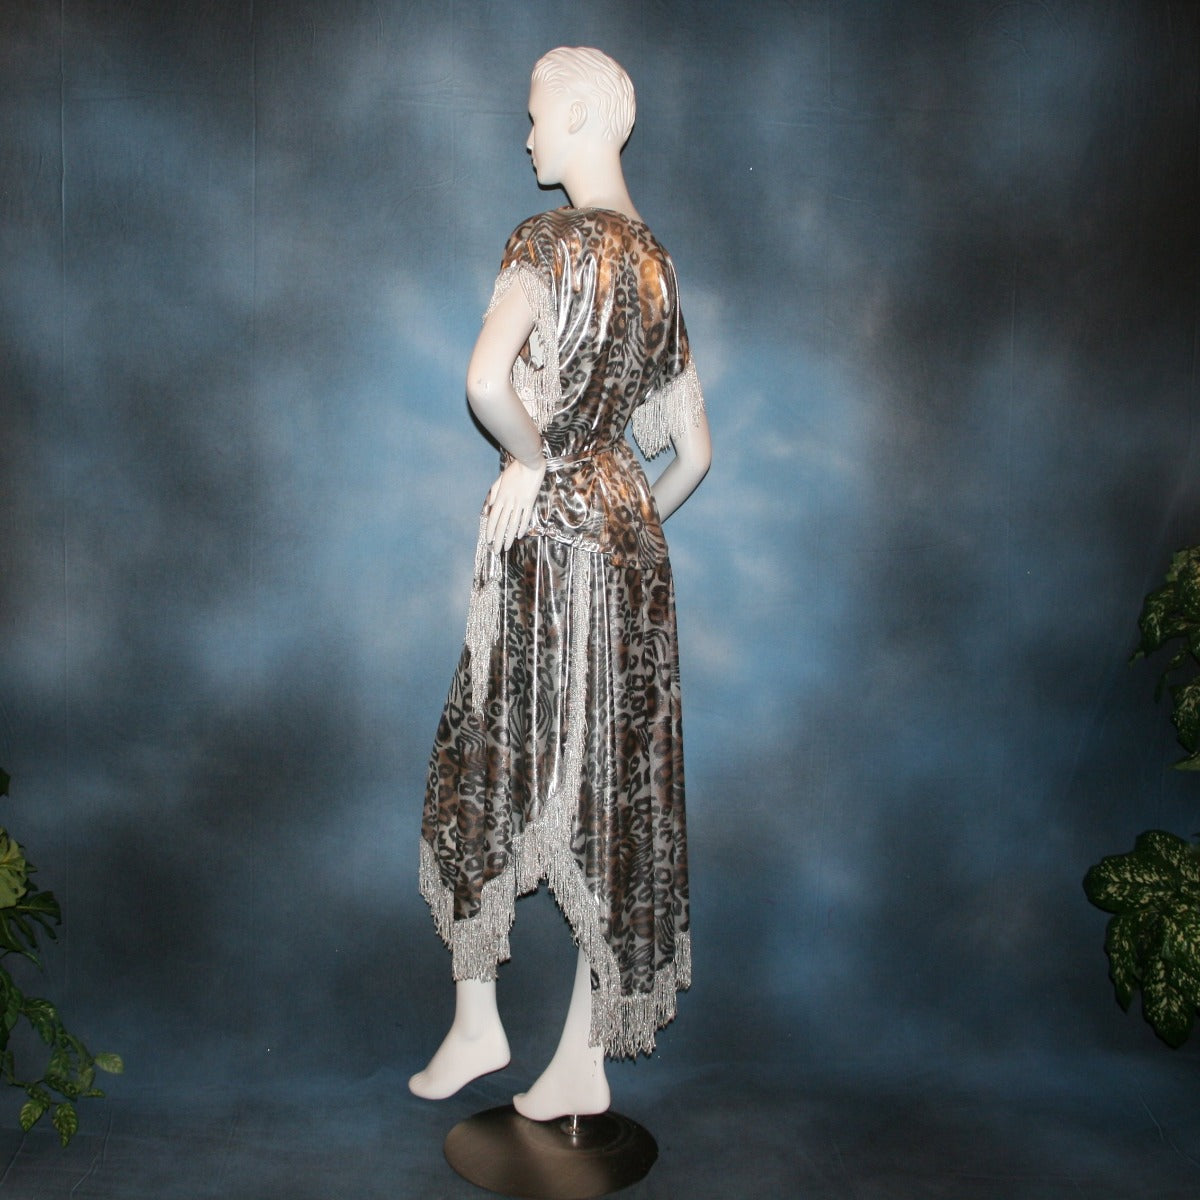 Crystal's Creations side view of Silver two panel Latin/rhythm skirt & top that has hand beading on neck edge of textured silver beads, with metallic fringe, was created of a leopard print knit with silver metallic on one side.